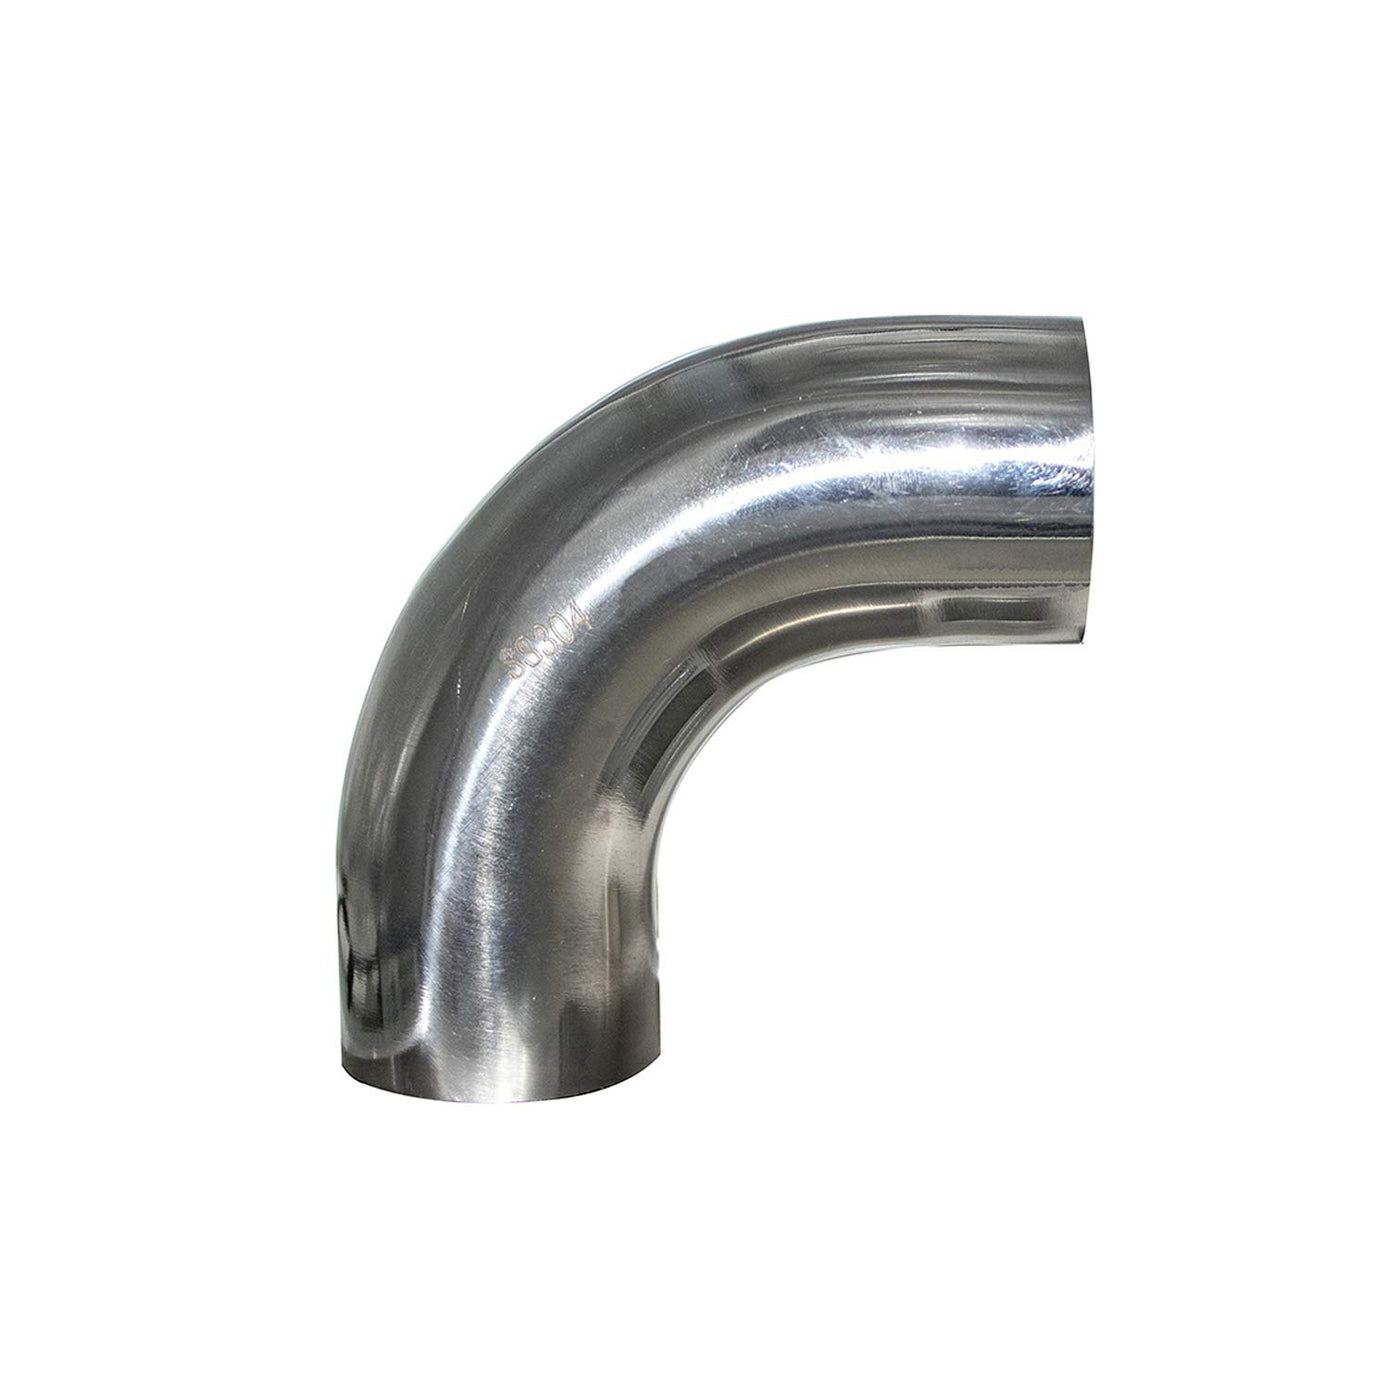 SS304 Bend 90 degree JLD-646 51 x 1.2mm